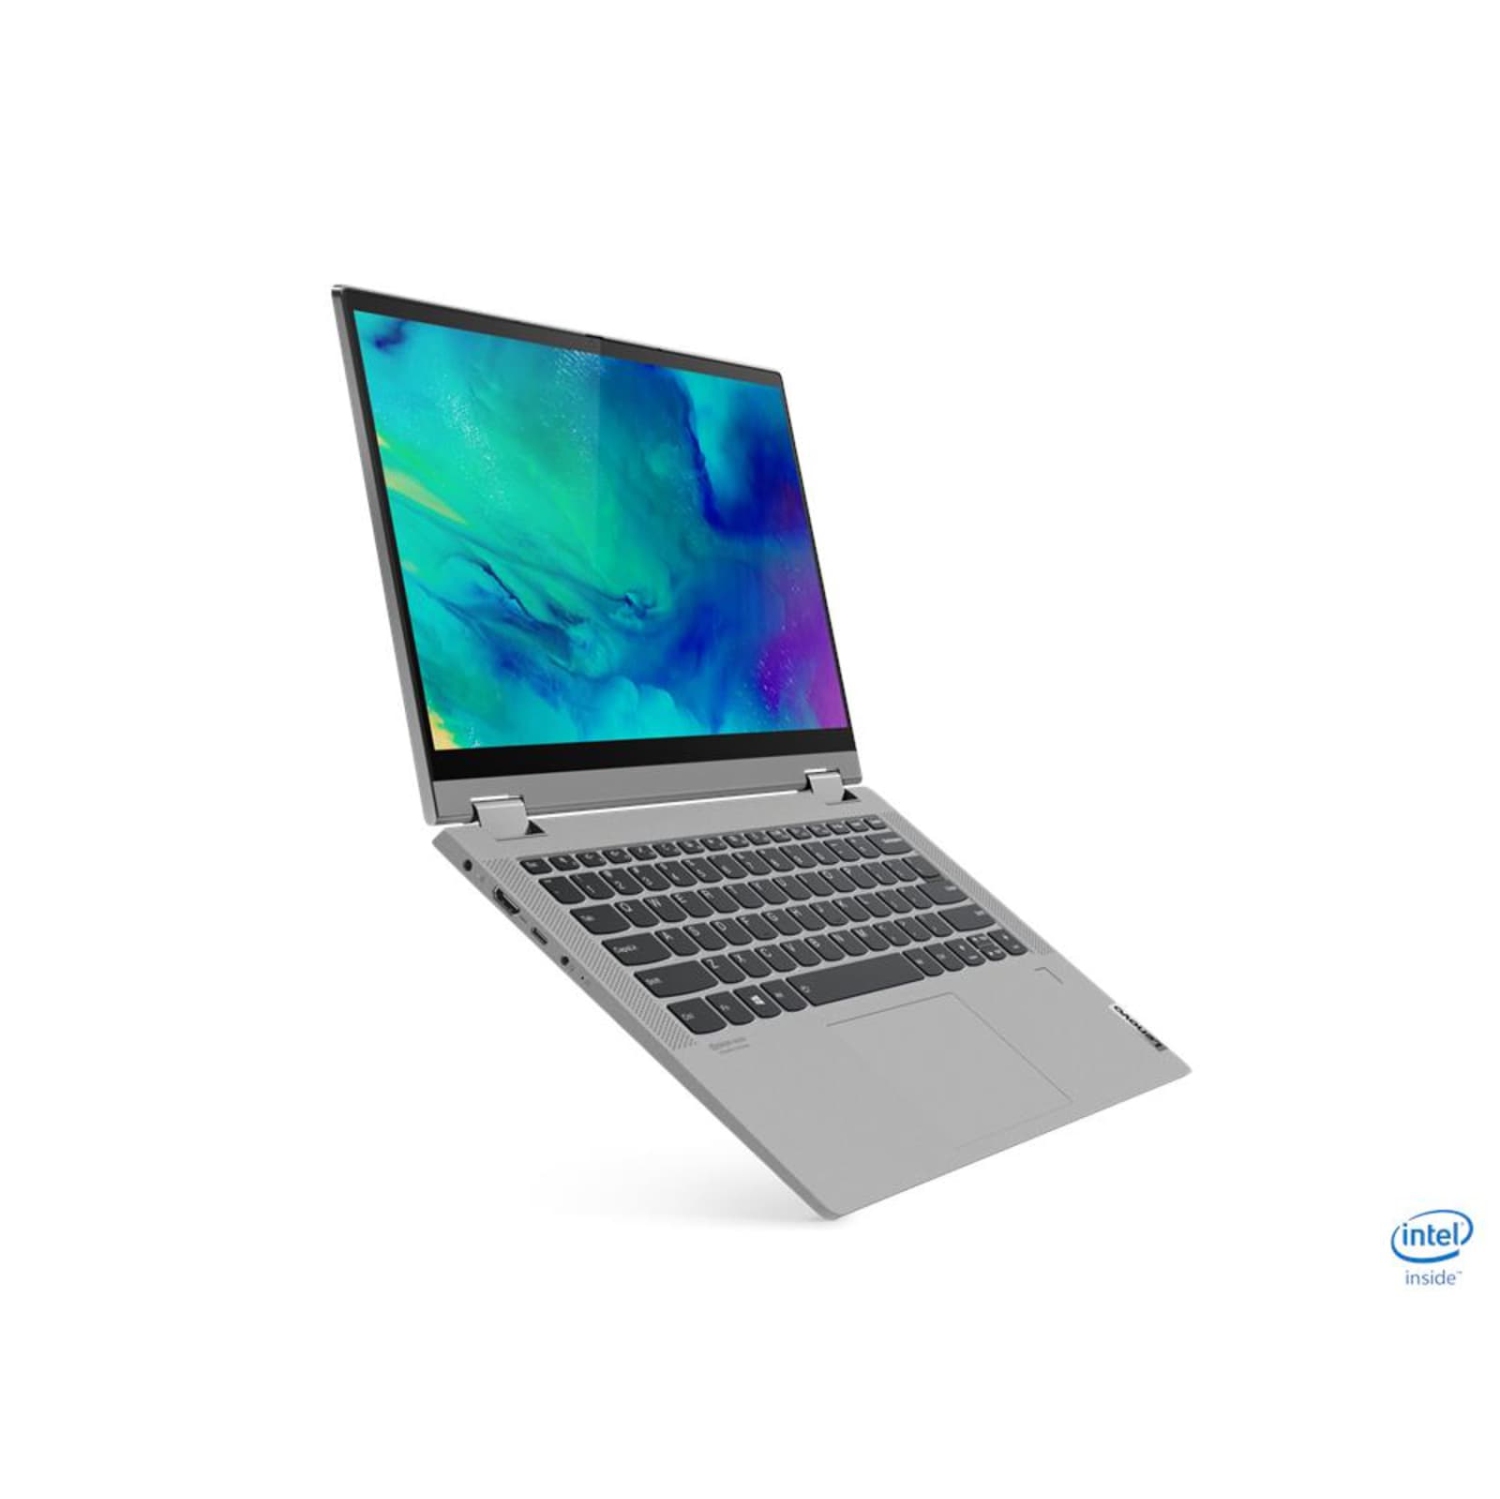 Refurbished (Excellent) Lenovo IdeaPad Flex 5 14ITL05 2-in-1 Laptop | 14" 1920x1080 FHD | Core i3-1115G4 - 512GB SSD Hard Drive - 4GB RAM | 2 cores @ 4.1 GHz Win 11 Home Silver